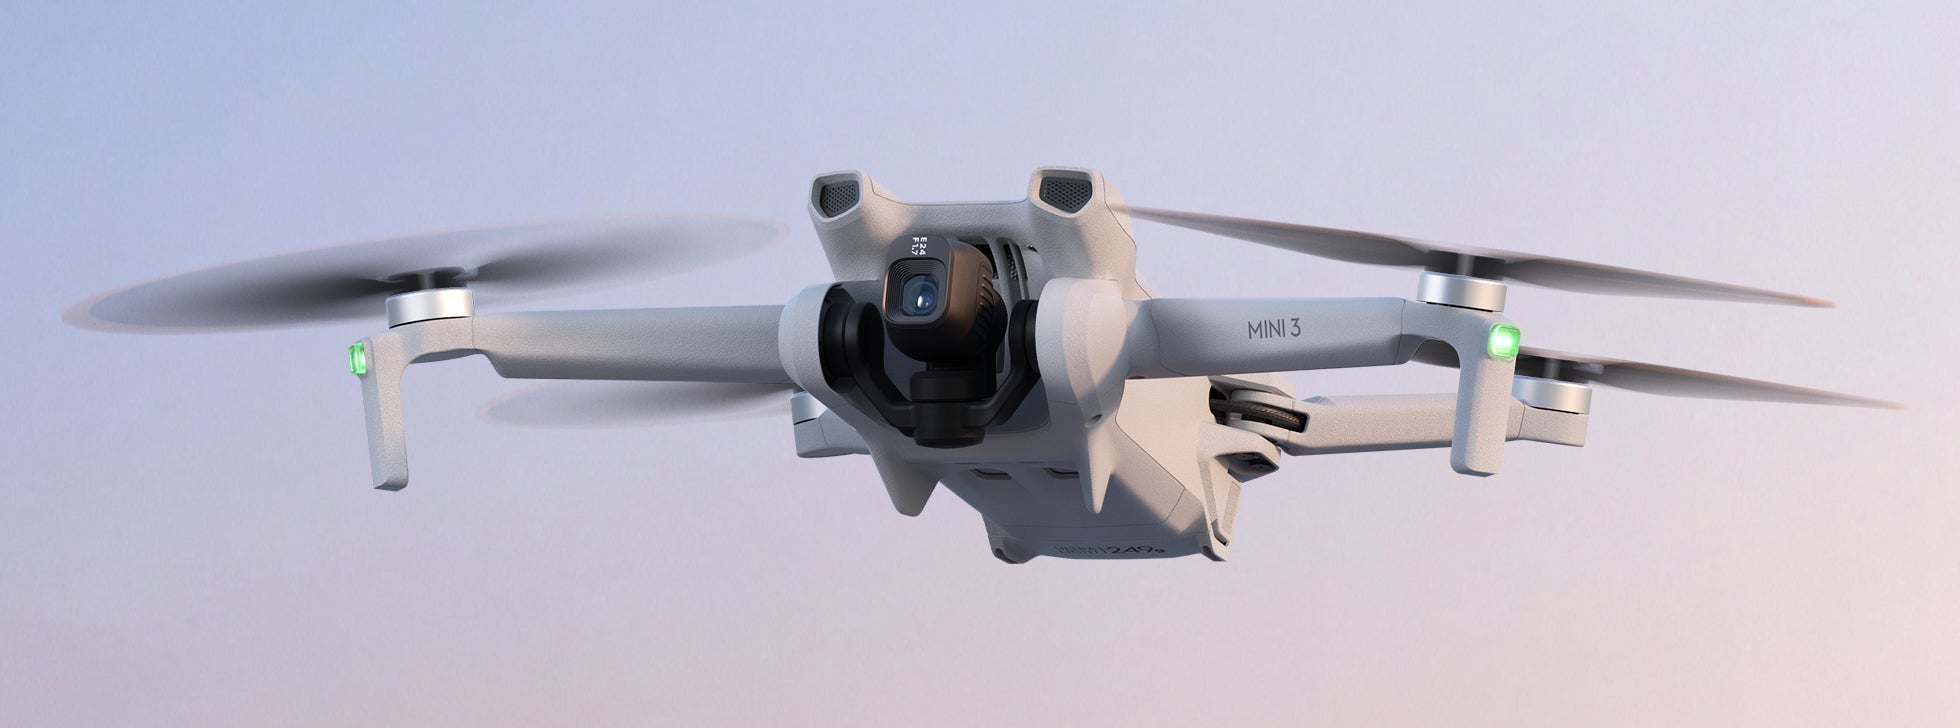 The new DJI Mini 3 features an added pair of support legs beneath the front propellers. (Image: DJI)